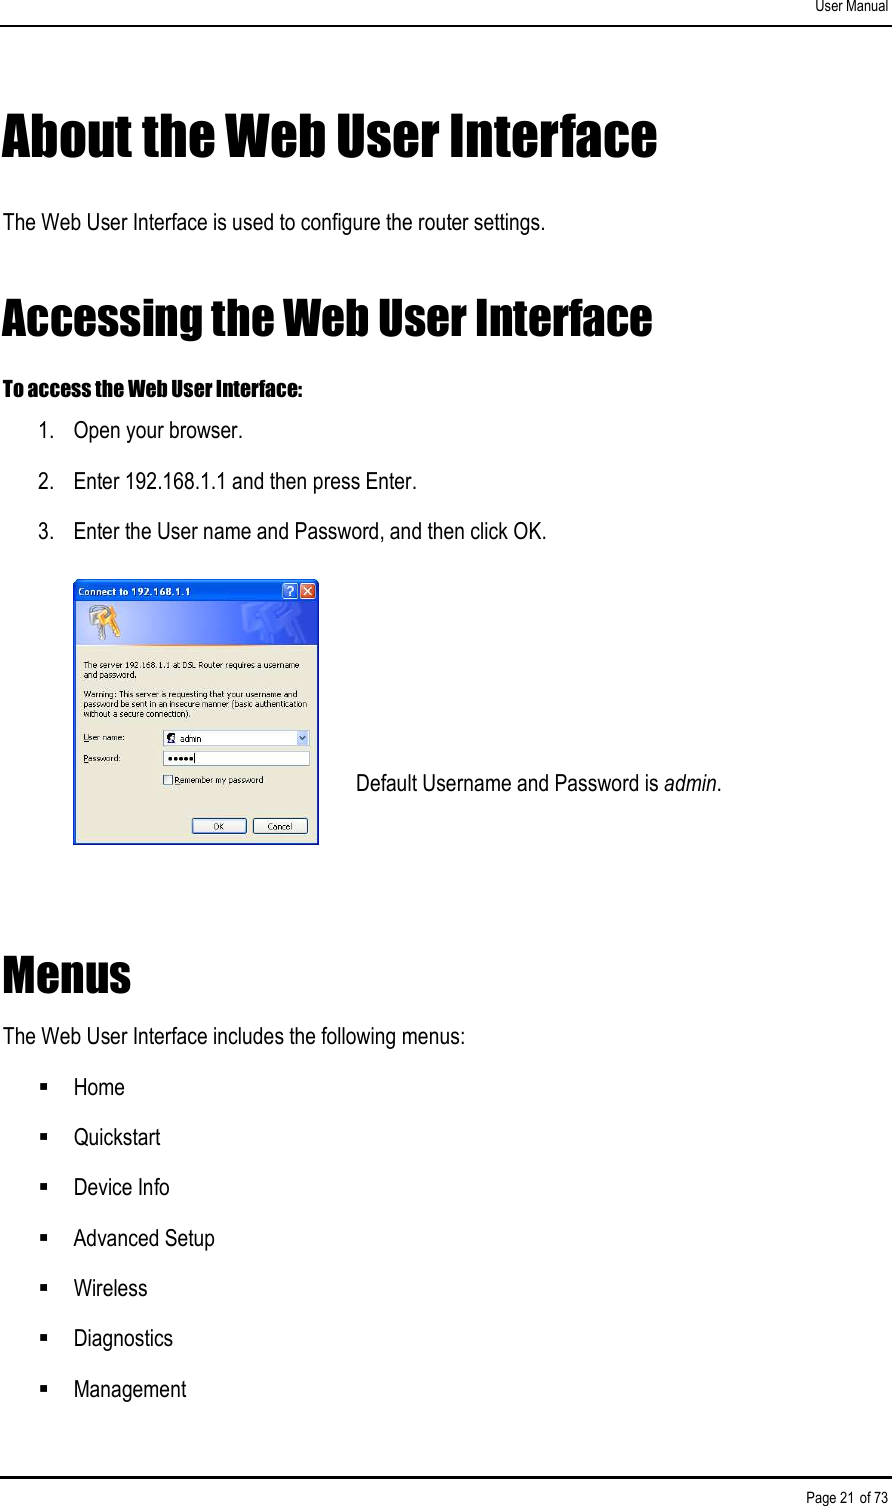 User Manual Page 21 of 73 About the Web User Interface The Web User Interface is used to configure the router settings. Accessing the Web User Interface To access the Web User Interface: 1.  Open your browser. 2.  Enter 192.168.1.1 and then press Enter.  3.  Enter the User name and Password, and then click OK.      Default Username and Password is admin.  Menus The Web User Interface includes the following menus:  Home  Quickstart  Device Info  Advanced Setup  Wireless  Diagnostics  Management 